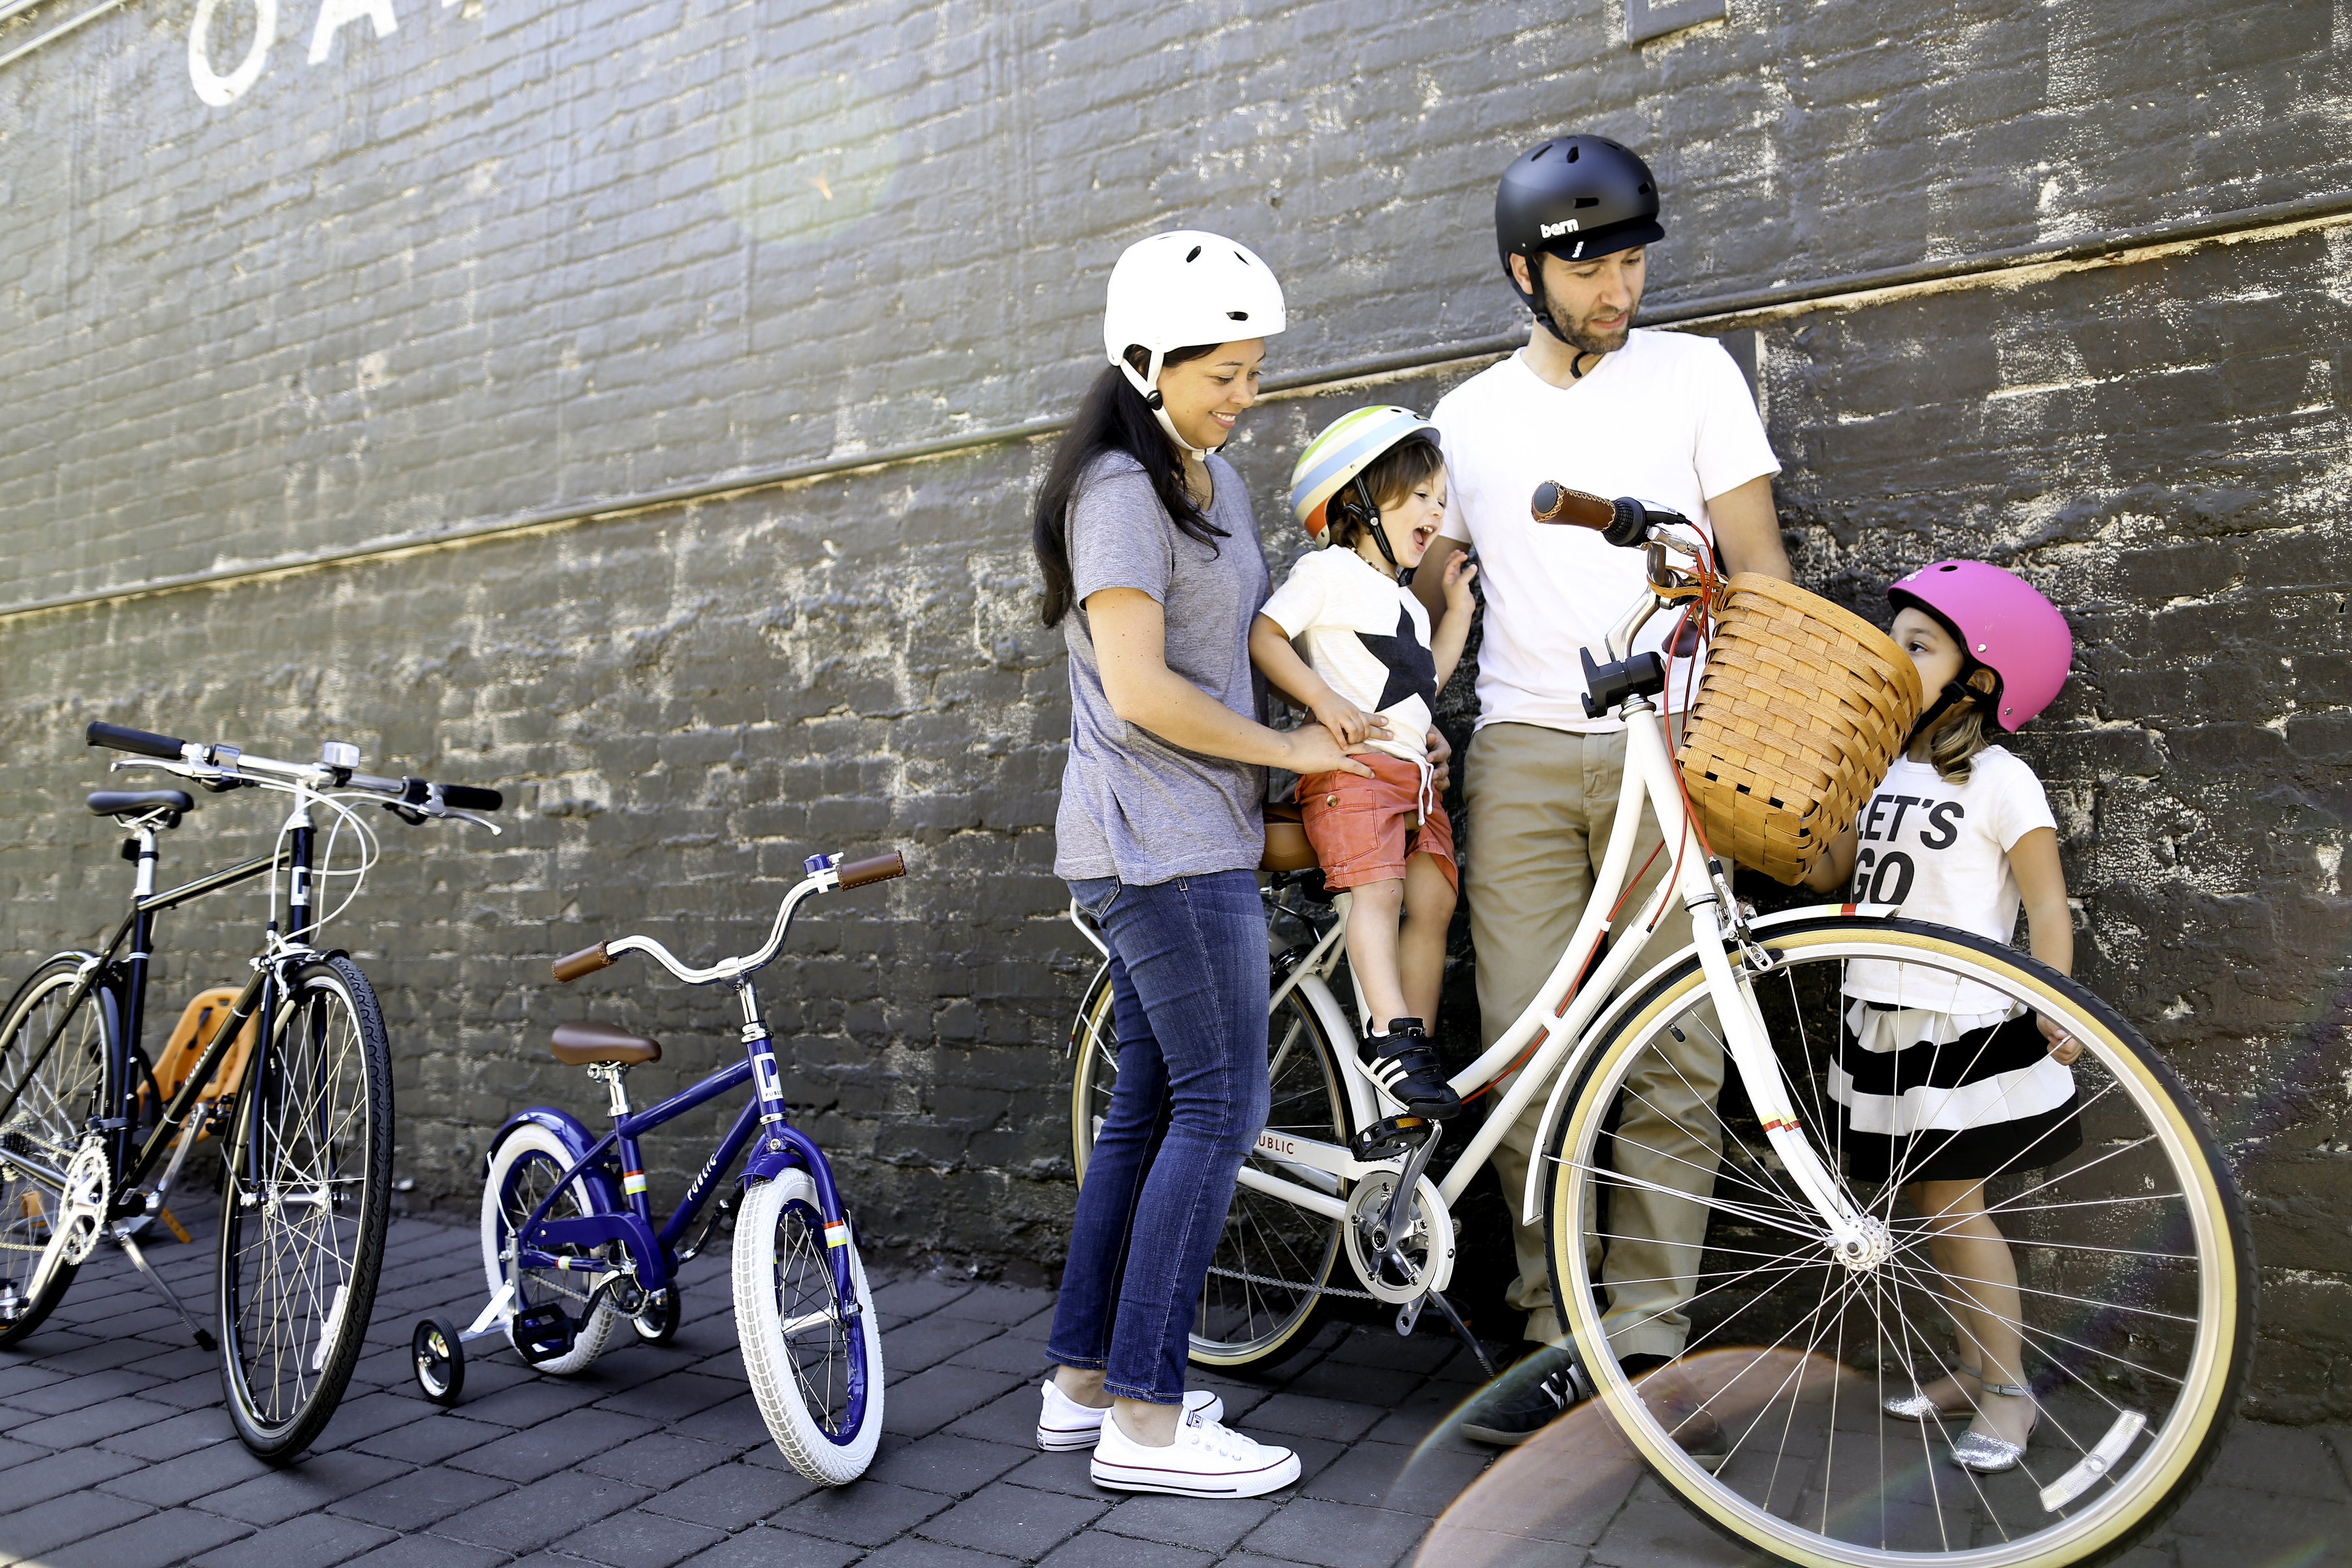 Our family outing bike ride in Oakland California with Public Bikes | Copy Cat Chic